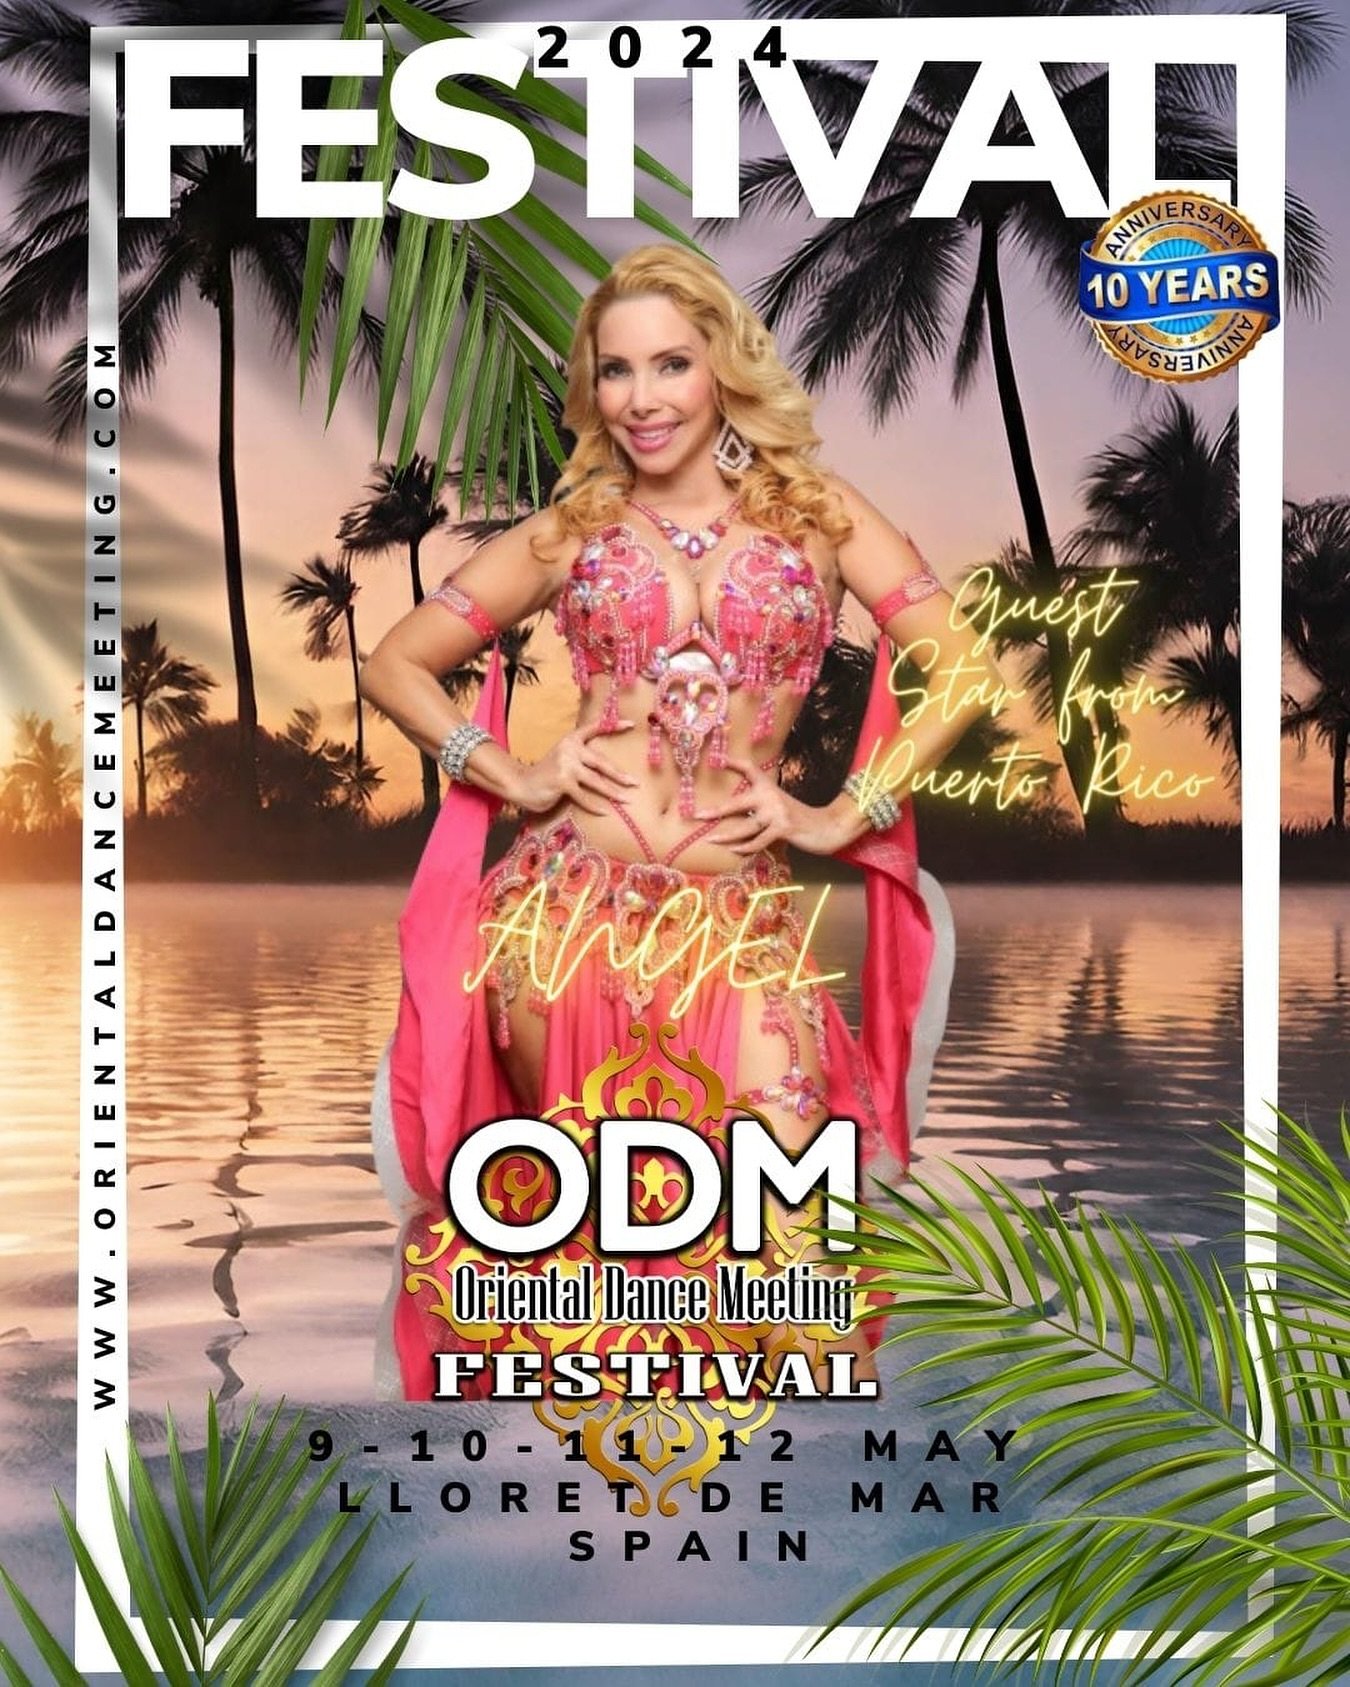 SPAIN🇪🇸!!! A while ago I told y&rsquo;all I had a performance coming up in Europe! Well, here is it is! I&rsquo;ll see you all at @odmfestival in Spain ❤️❤️❤️